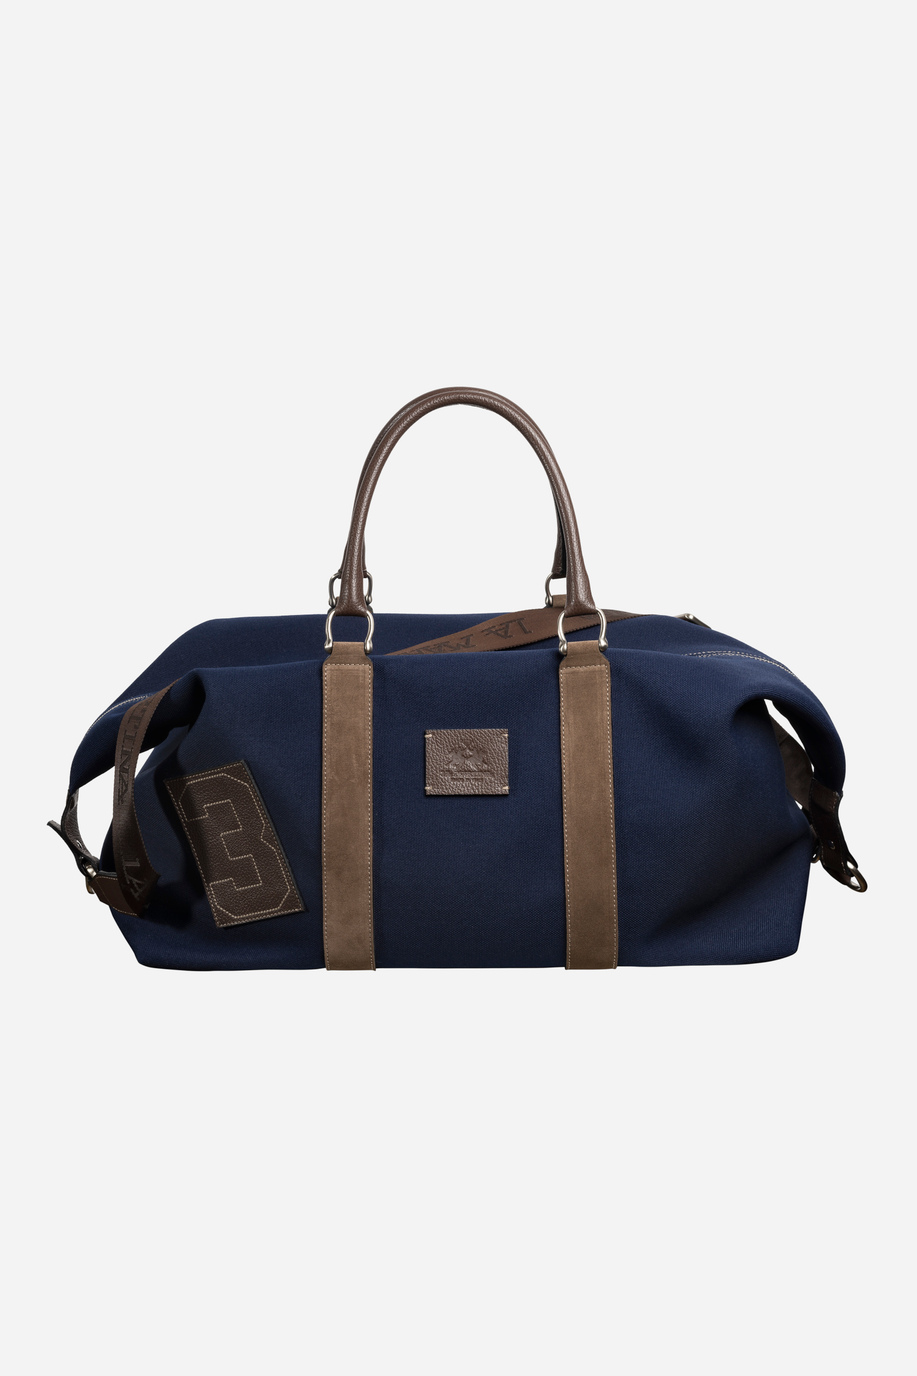 Cotton duffle bag with leather inserts - Elegant looks for him | La Martina - Official Online Shop